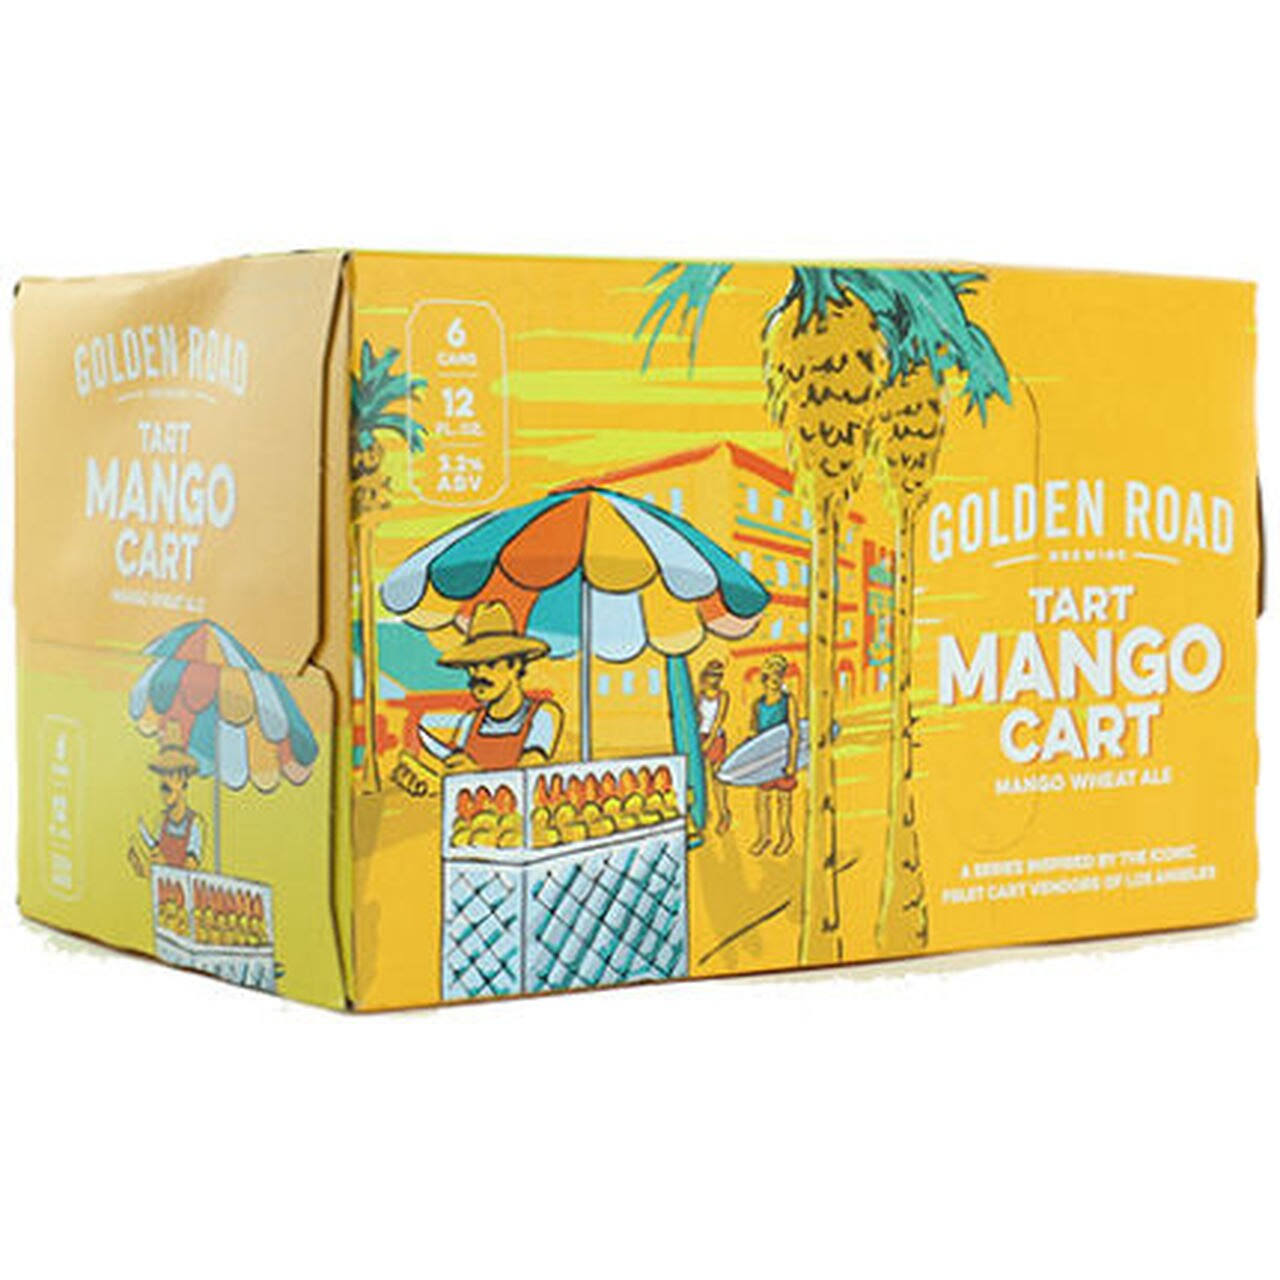 Golden Road Brewing Mango Cart Wheat Ale Beer Cans - 12 fl oz